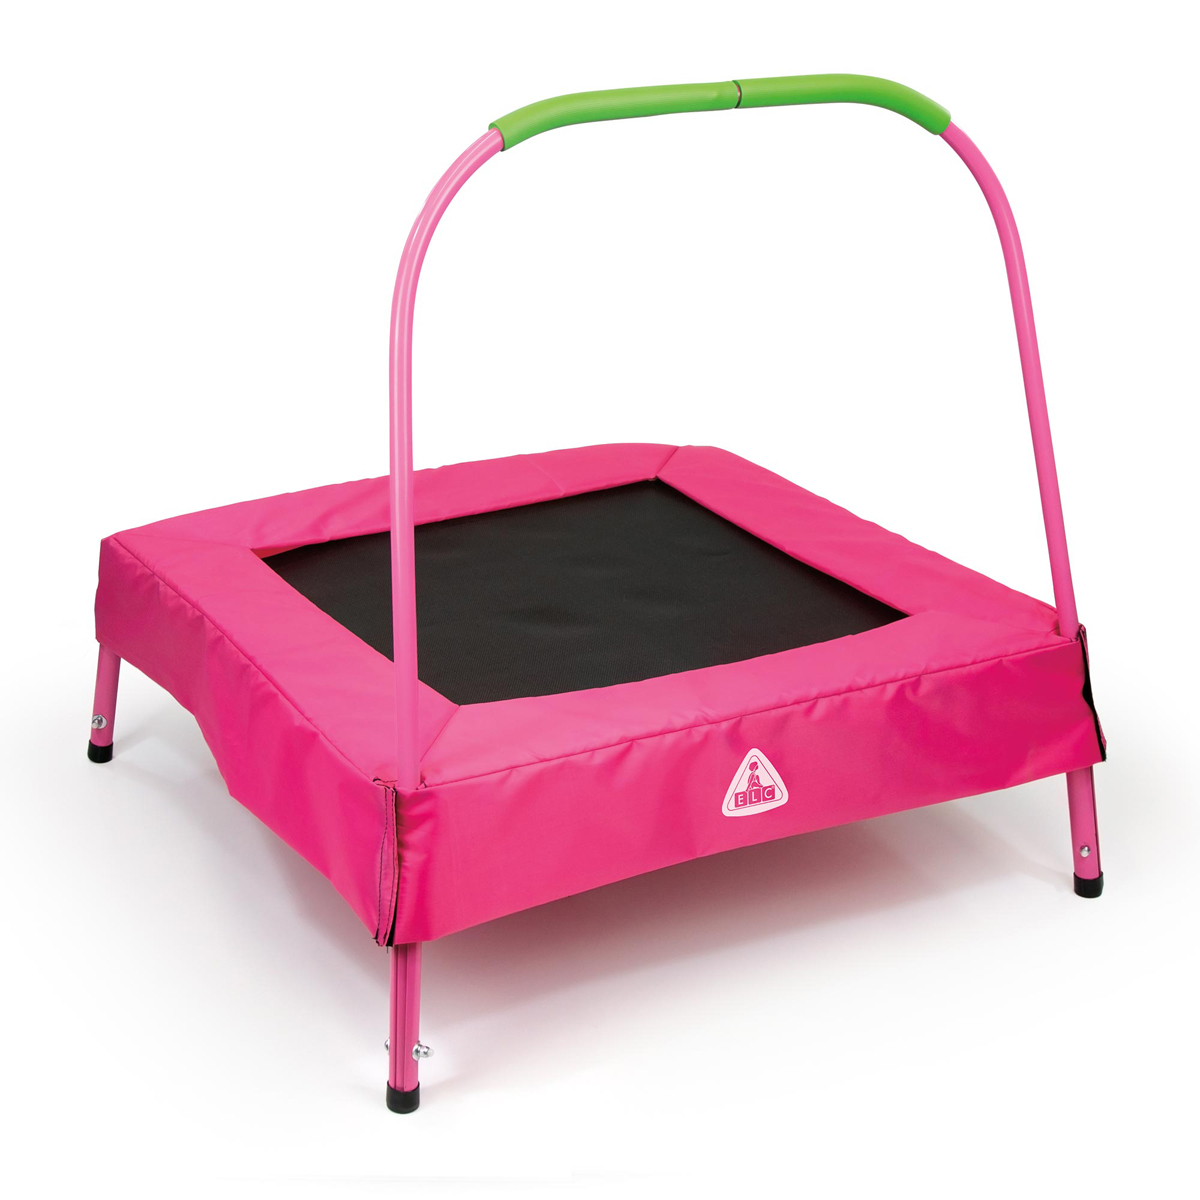  Early Learning Centre Junior Trampoline